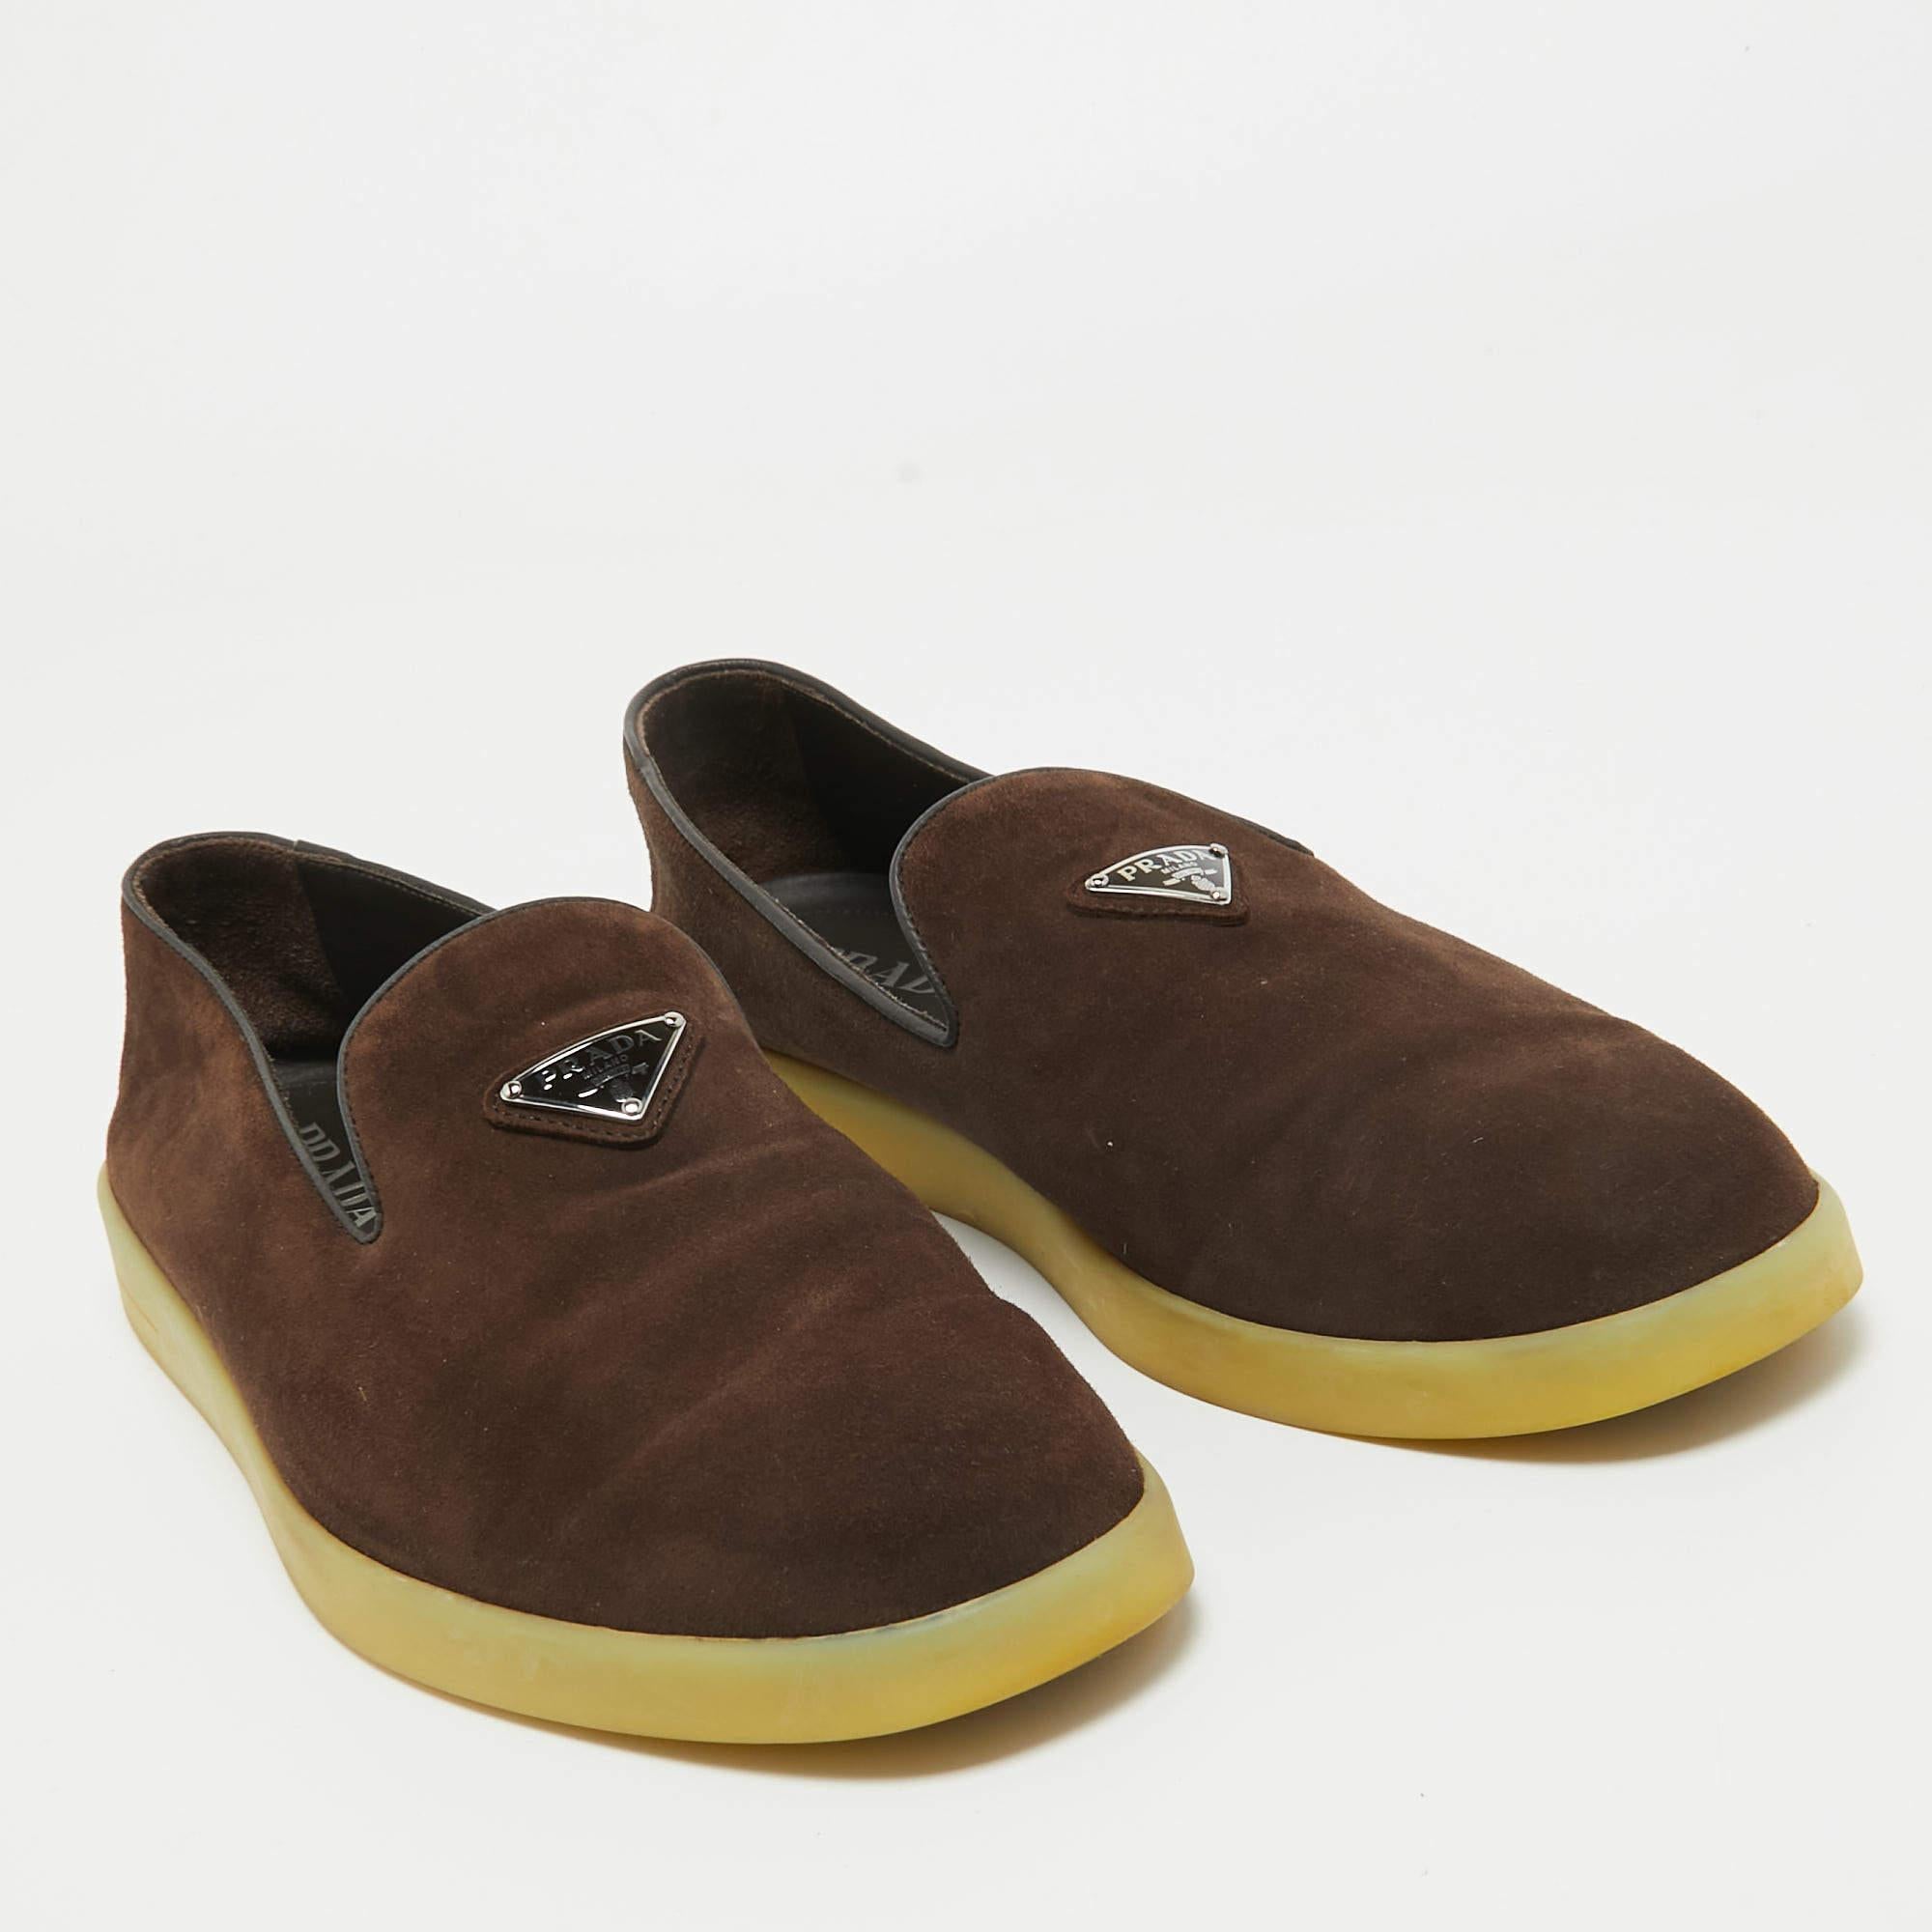 Prada Brown Suede Slip On Loafers Size 42 3